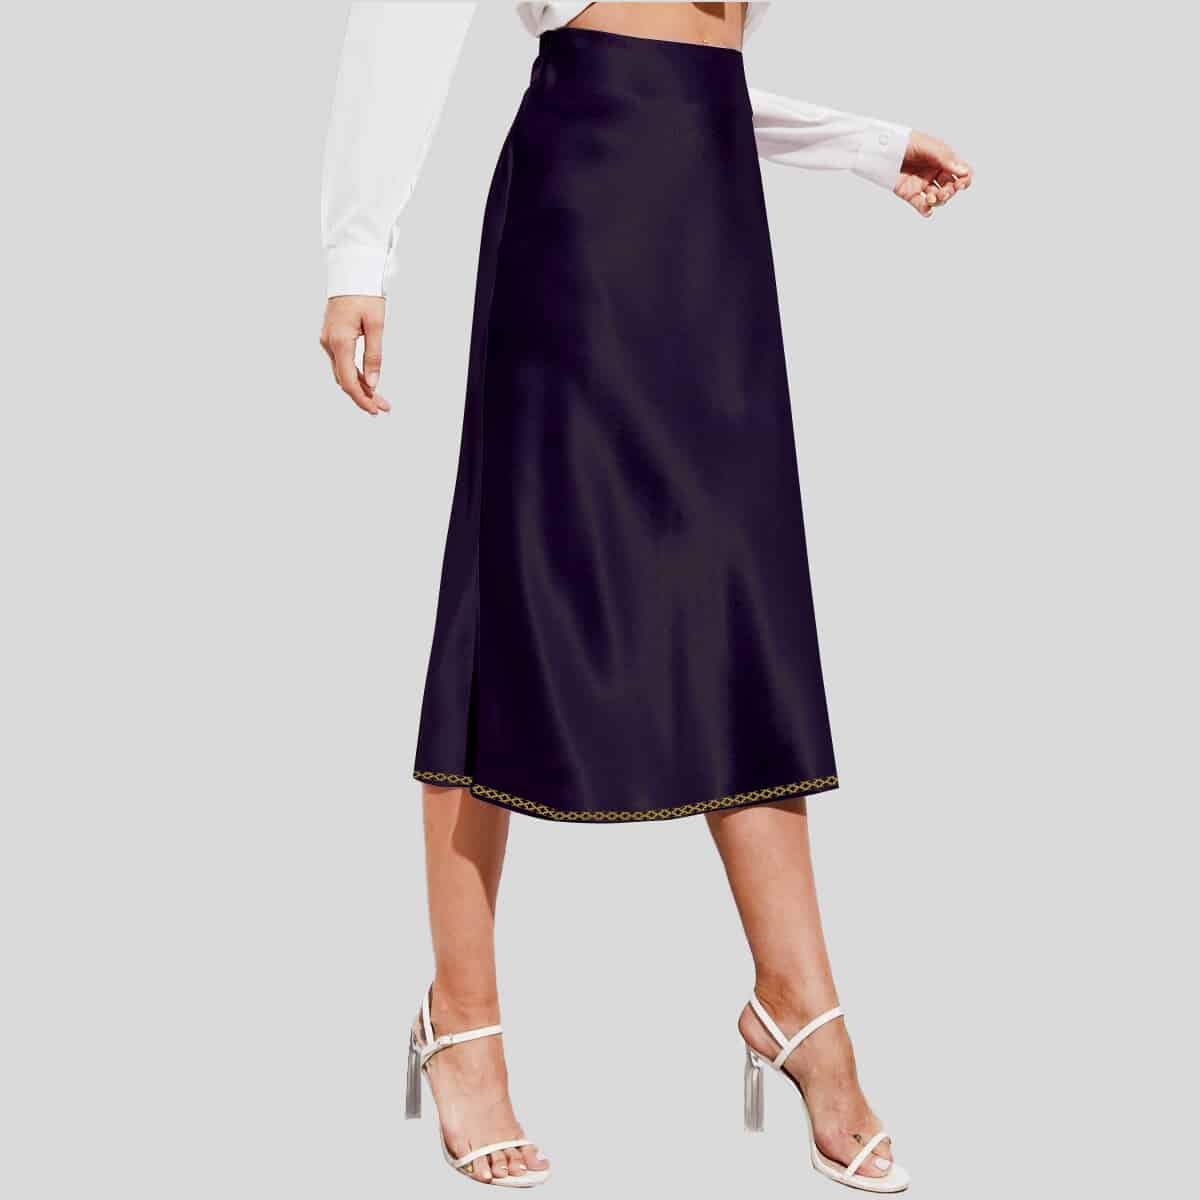 Black Zipper Side Solid Satin Skirt with Print Detailed-RES012